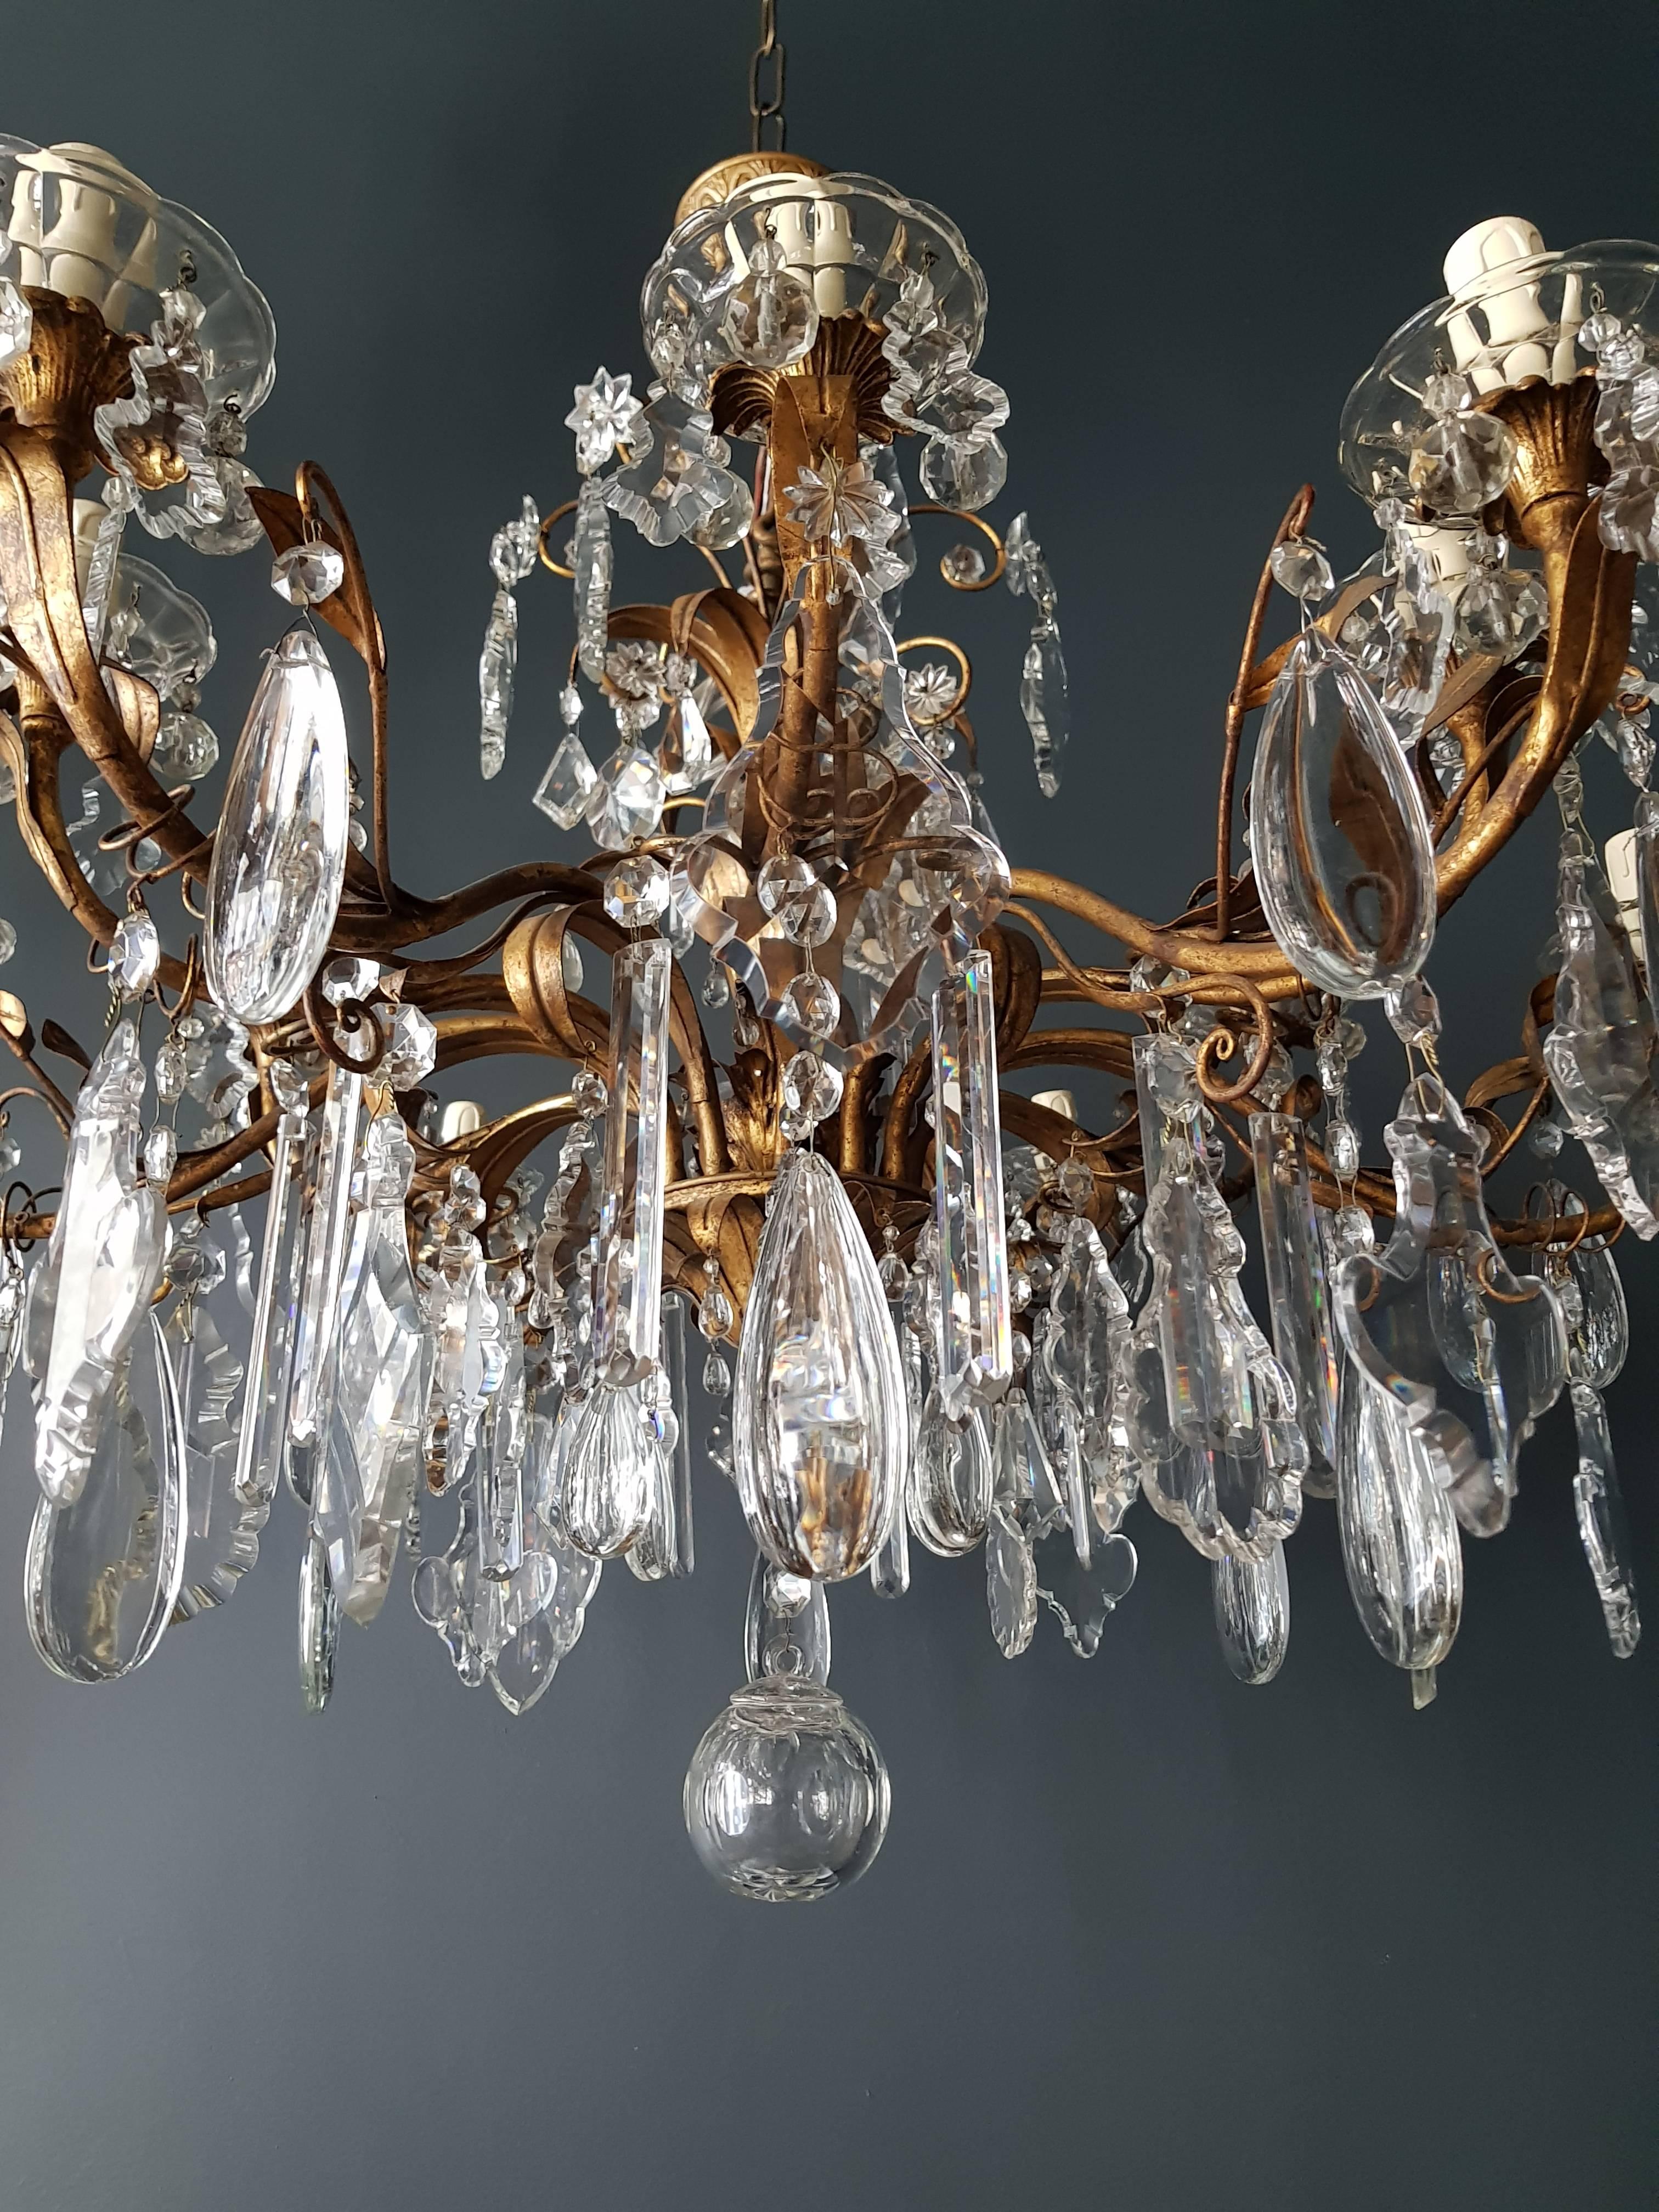 Hand-Crafted Crystal Chandelier Antique Ceiling Lamp Murano Florentiner Lustre Art Nouveau